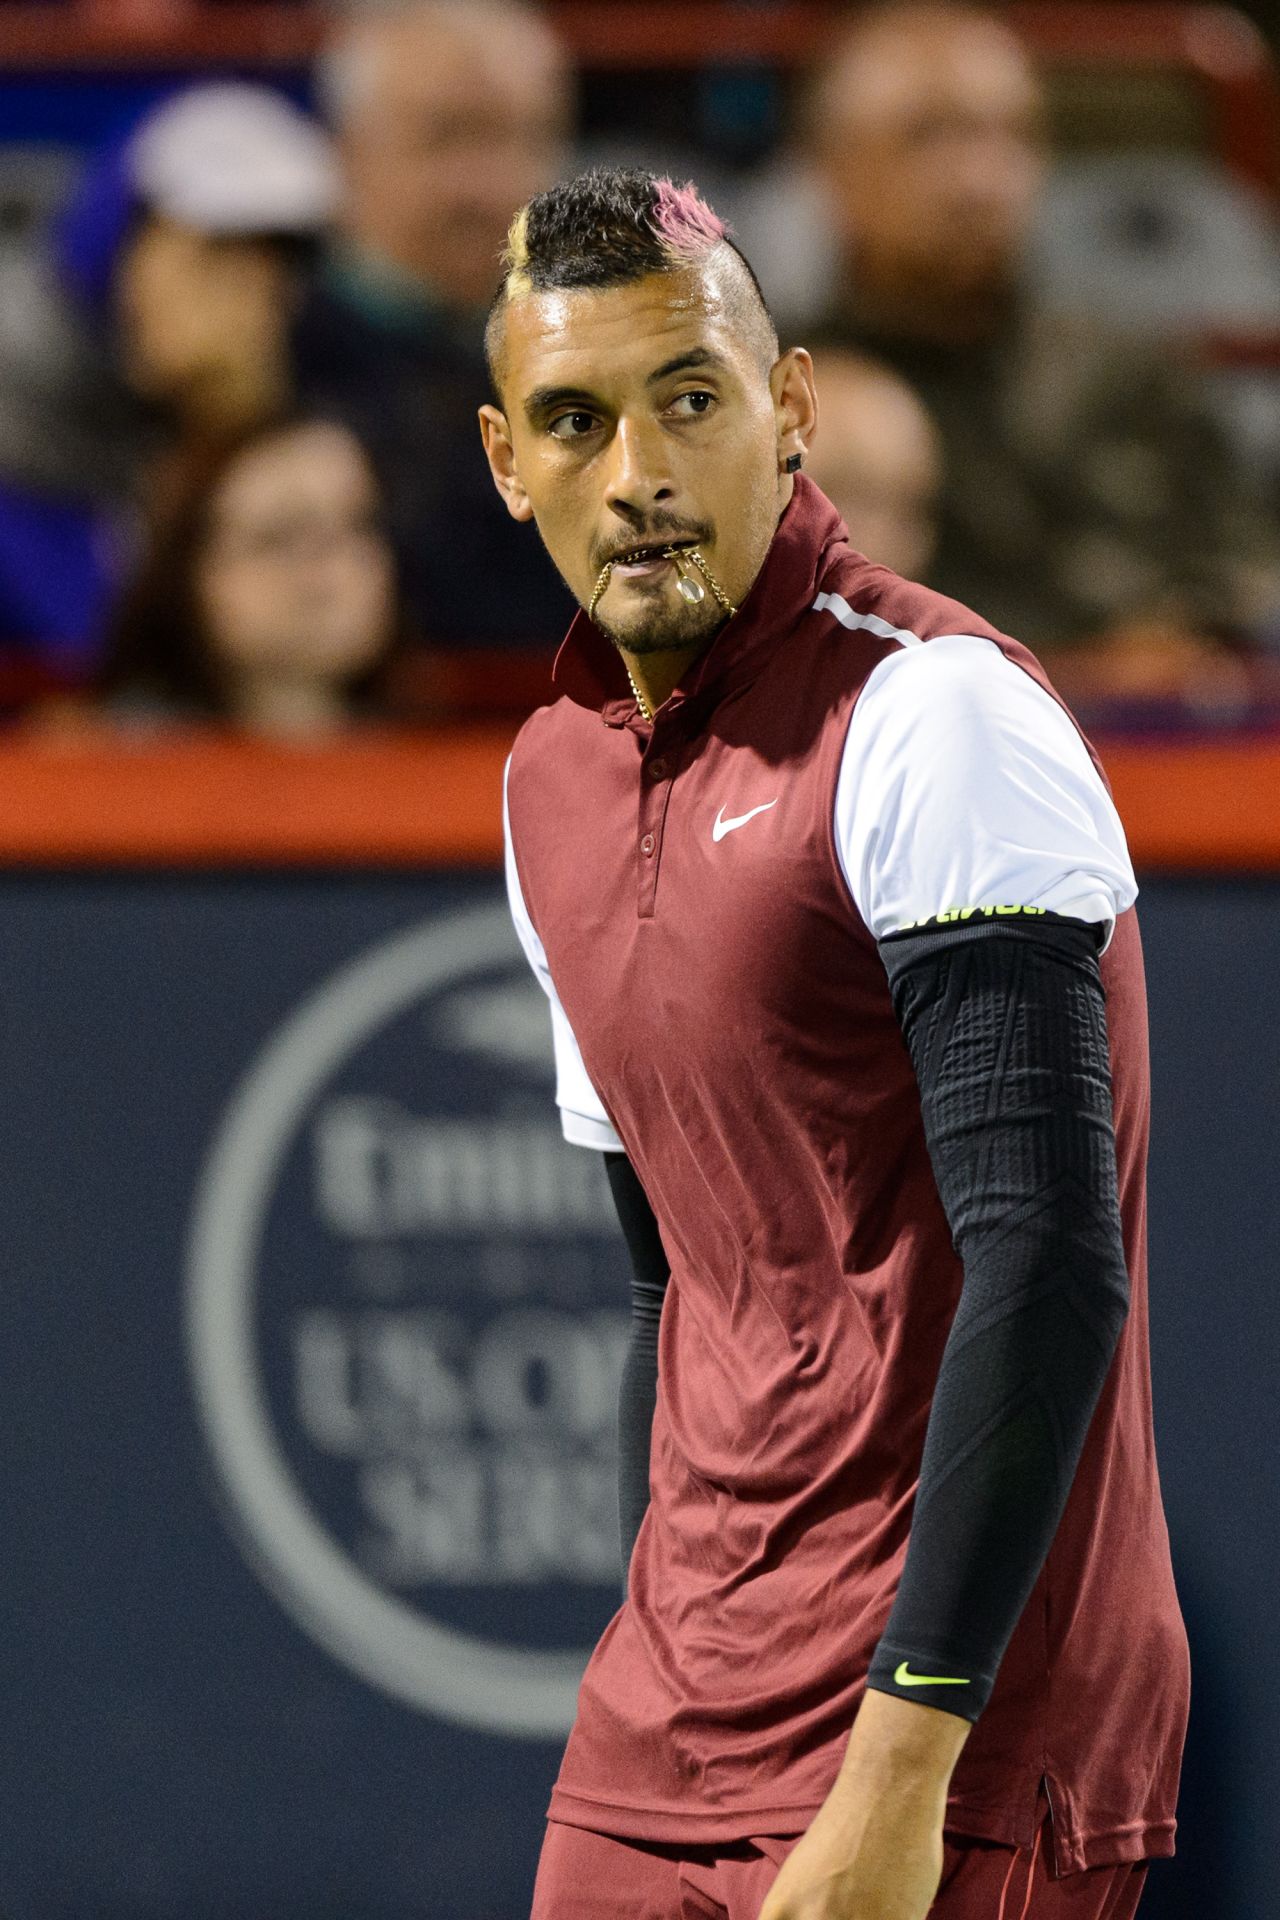 Nick Kyrgios landed in hot water -- again -- after sledging Stan Wawrinka during their tennis match at the Rogers Cup in Montreal. He was later fined by the ATP, which then added a suspended punishment. 